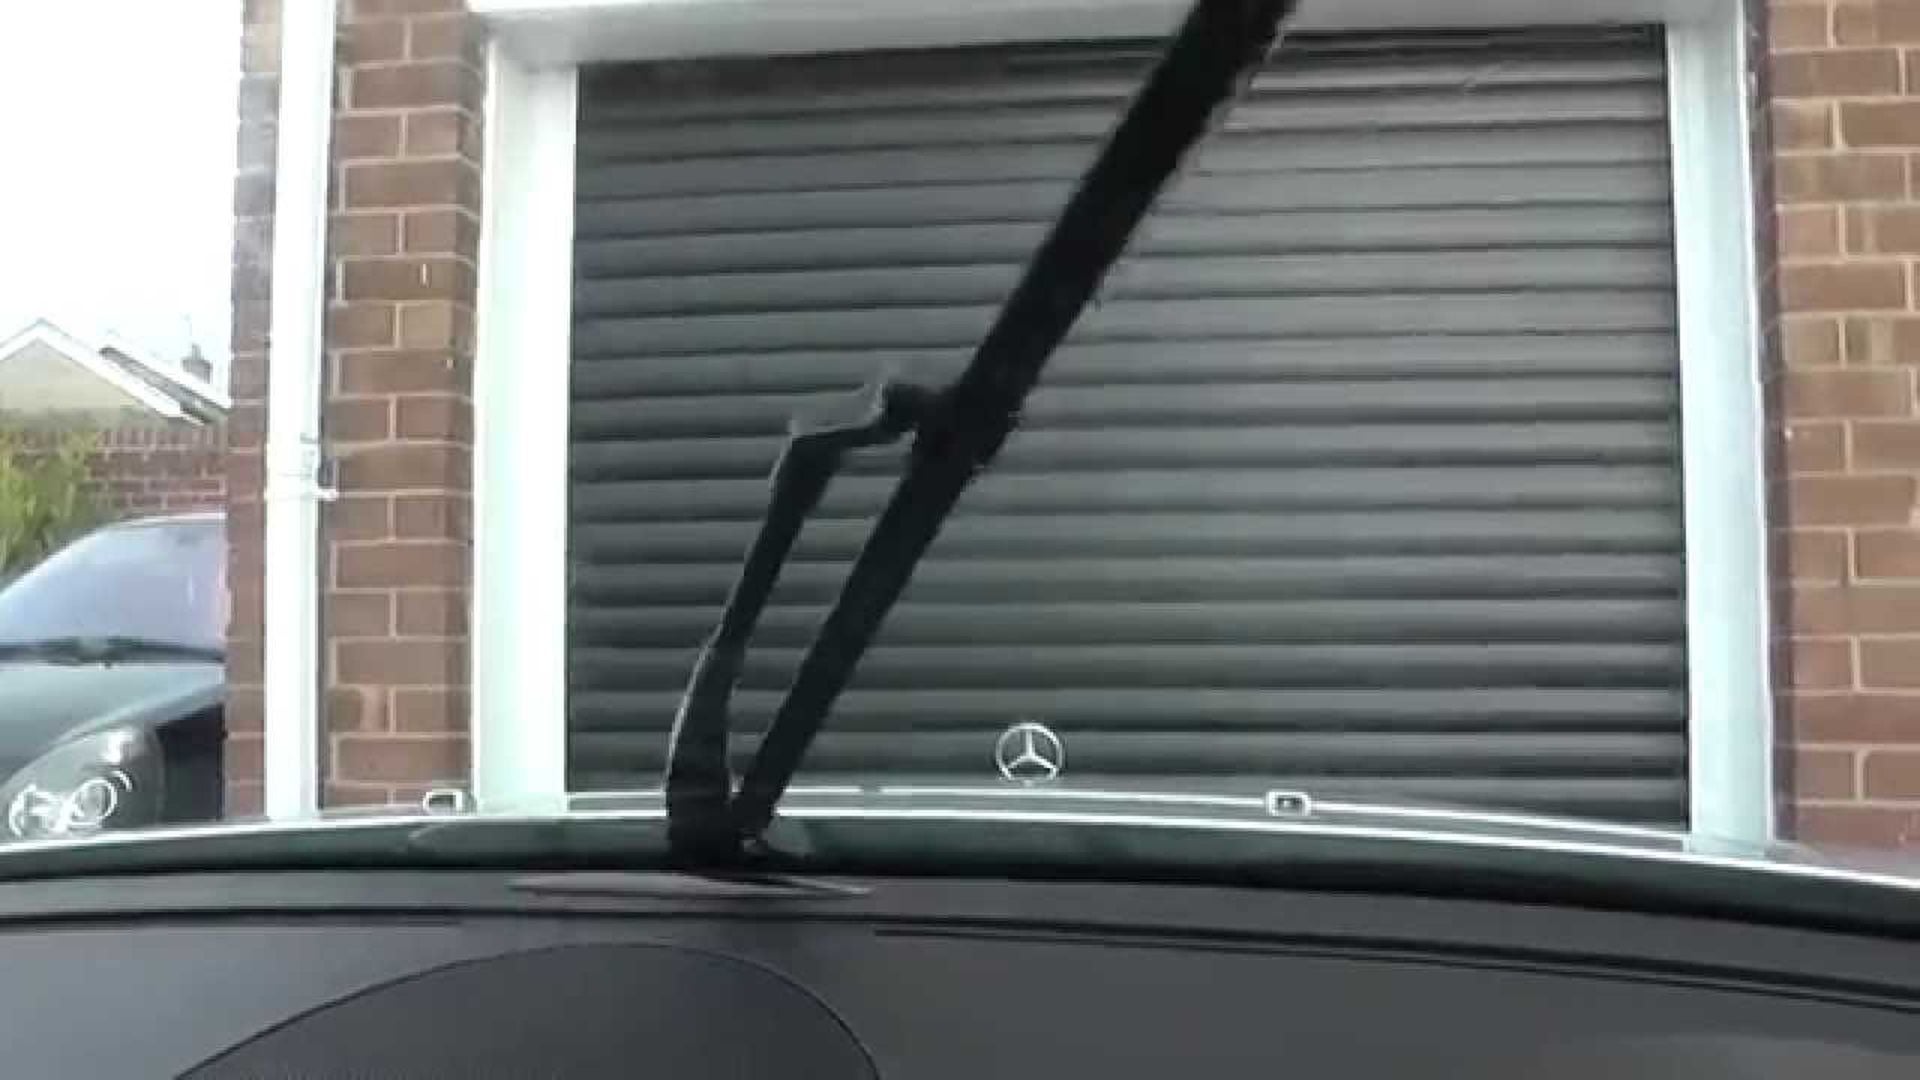 DIY: How Come There's No Wiper Fluid Coming Out?